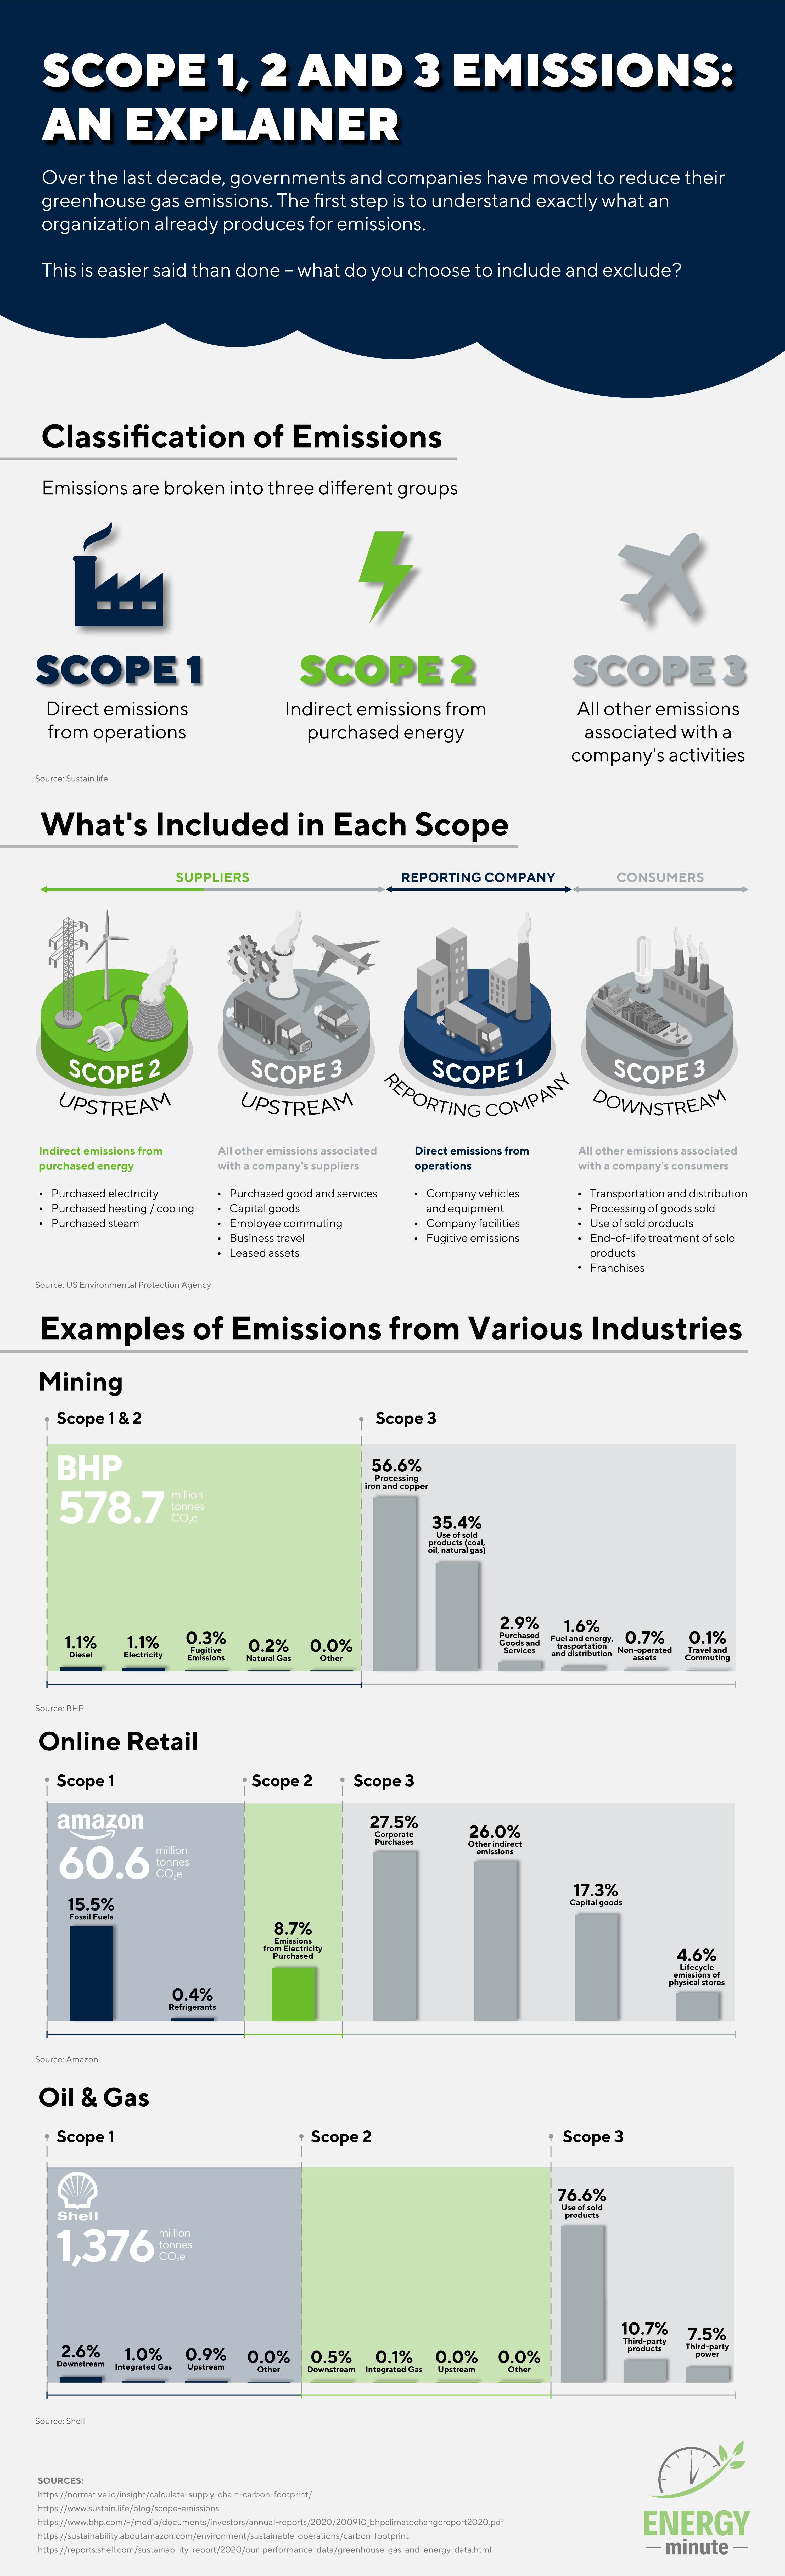 What are Scope 1, 2 and 3 emissions?